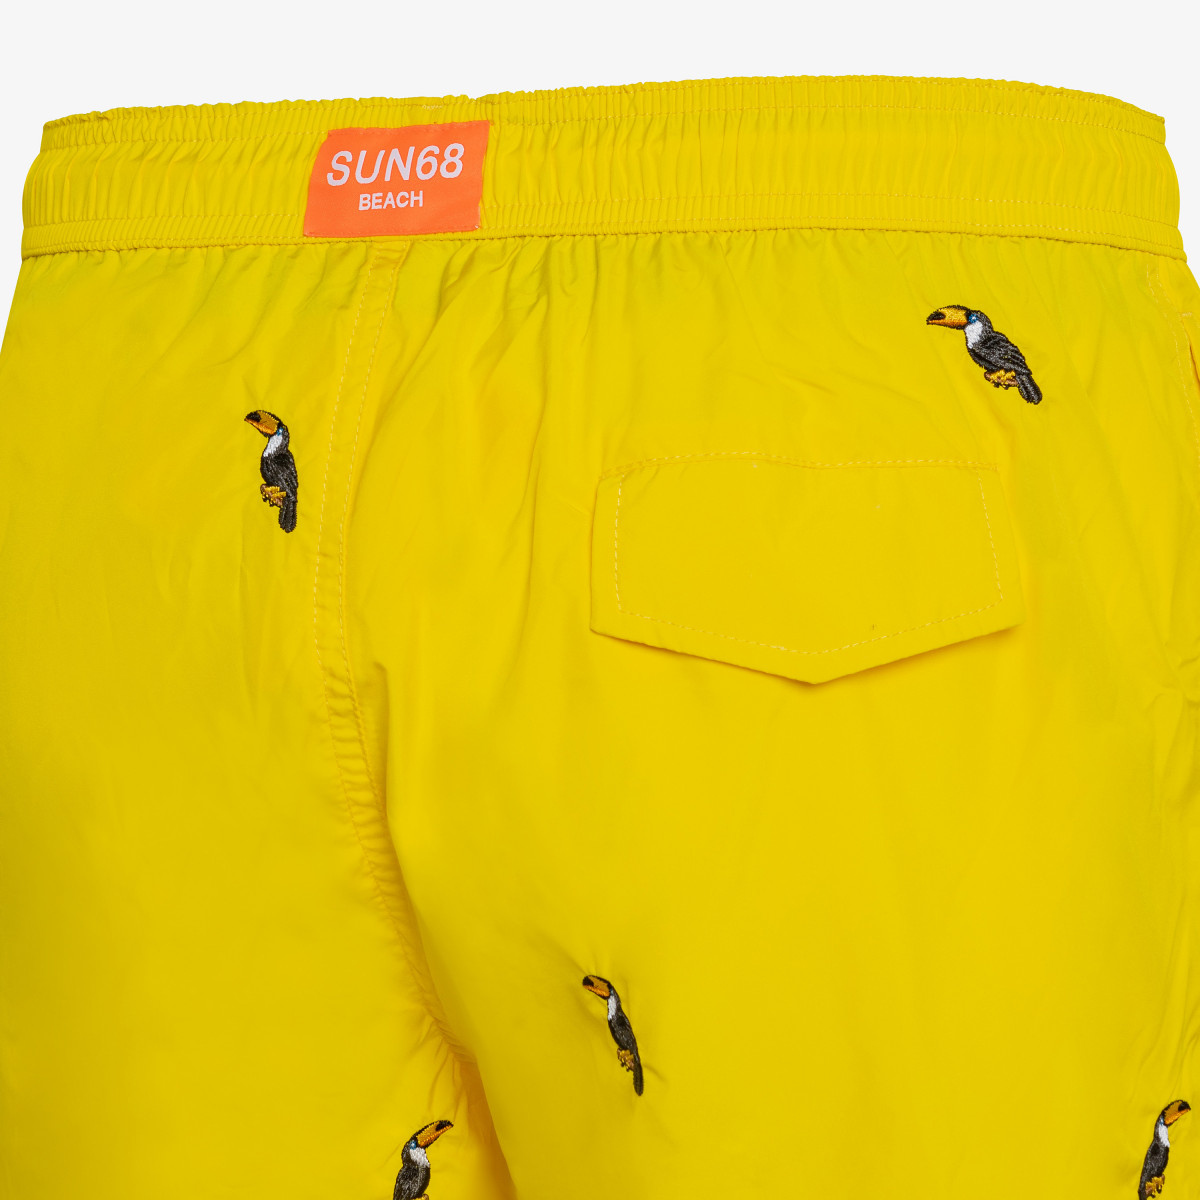 SWIM PANT EMBRODERY YELLOW